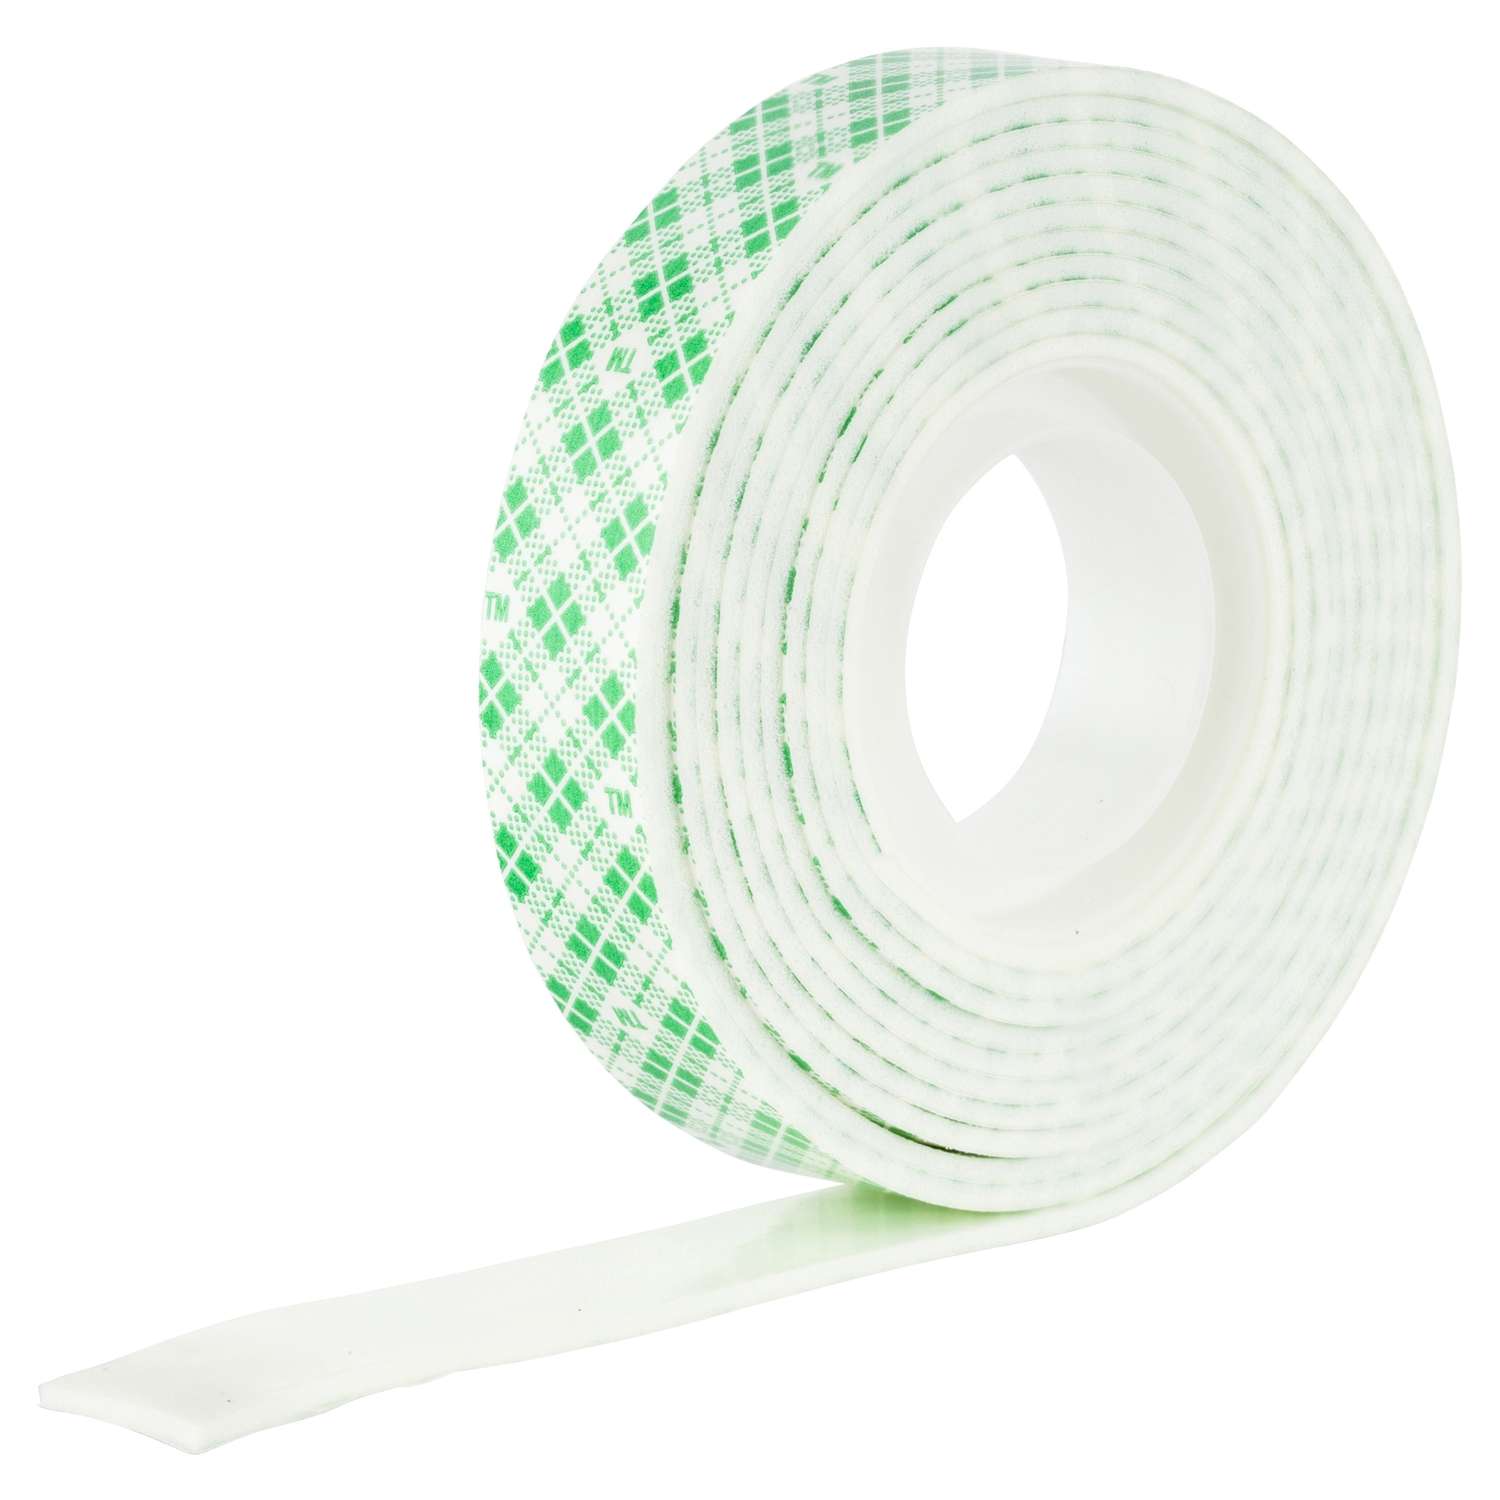 Double Sided Gaffer Tape - Carpet Tape: FREE S&H No Min Order